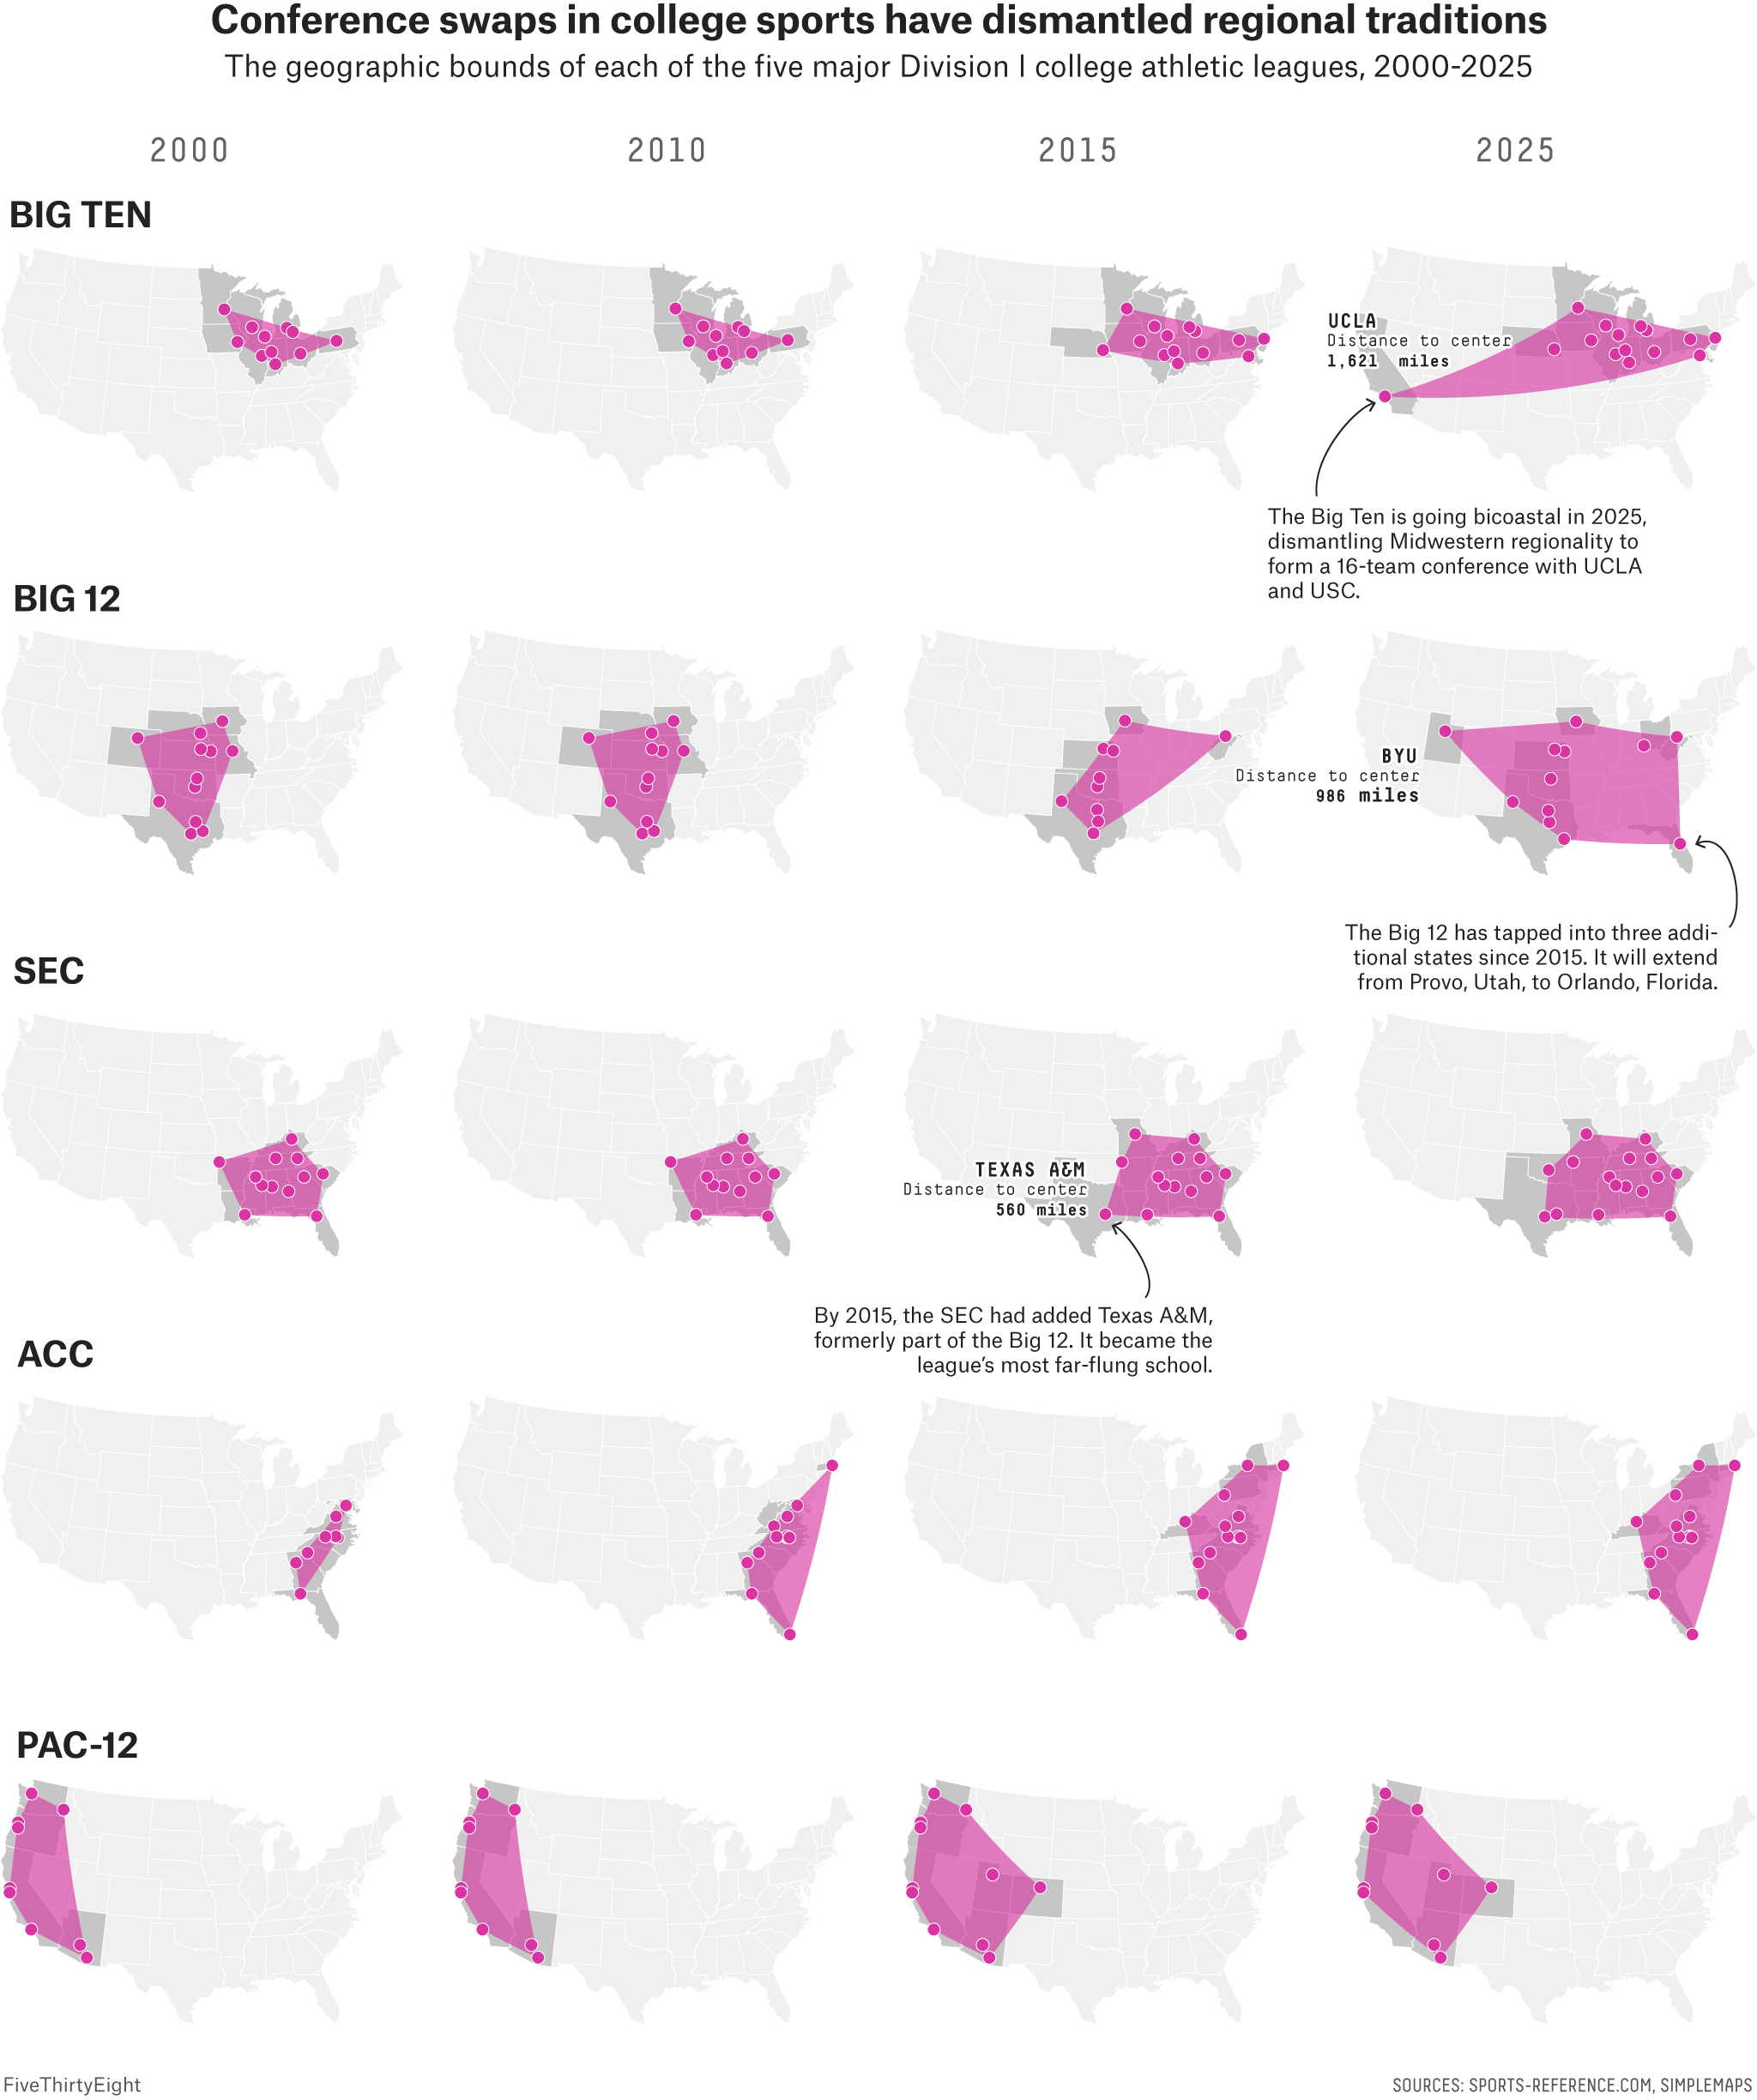 A grid of 20 maps show how the Big Ten, Big 12, SEC, ACC and PAC-12 have shifted geographically from 2000 to 2025. In the case of the Big 10, by 2025 it will span the entire U.S. with the additions of UCLA and USC. 